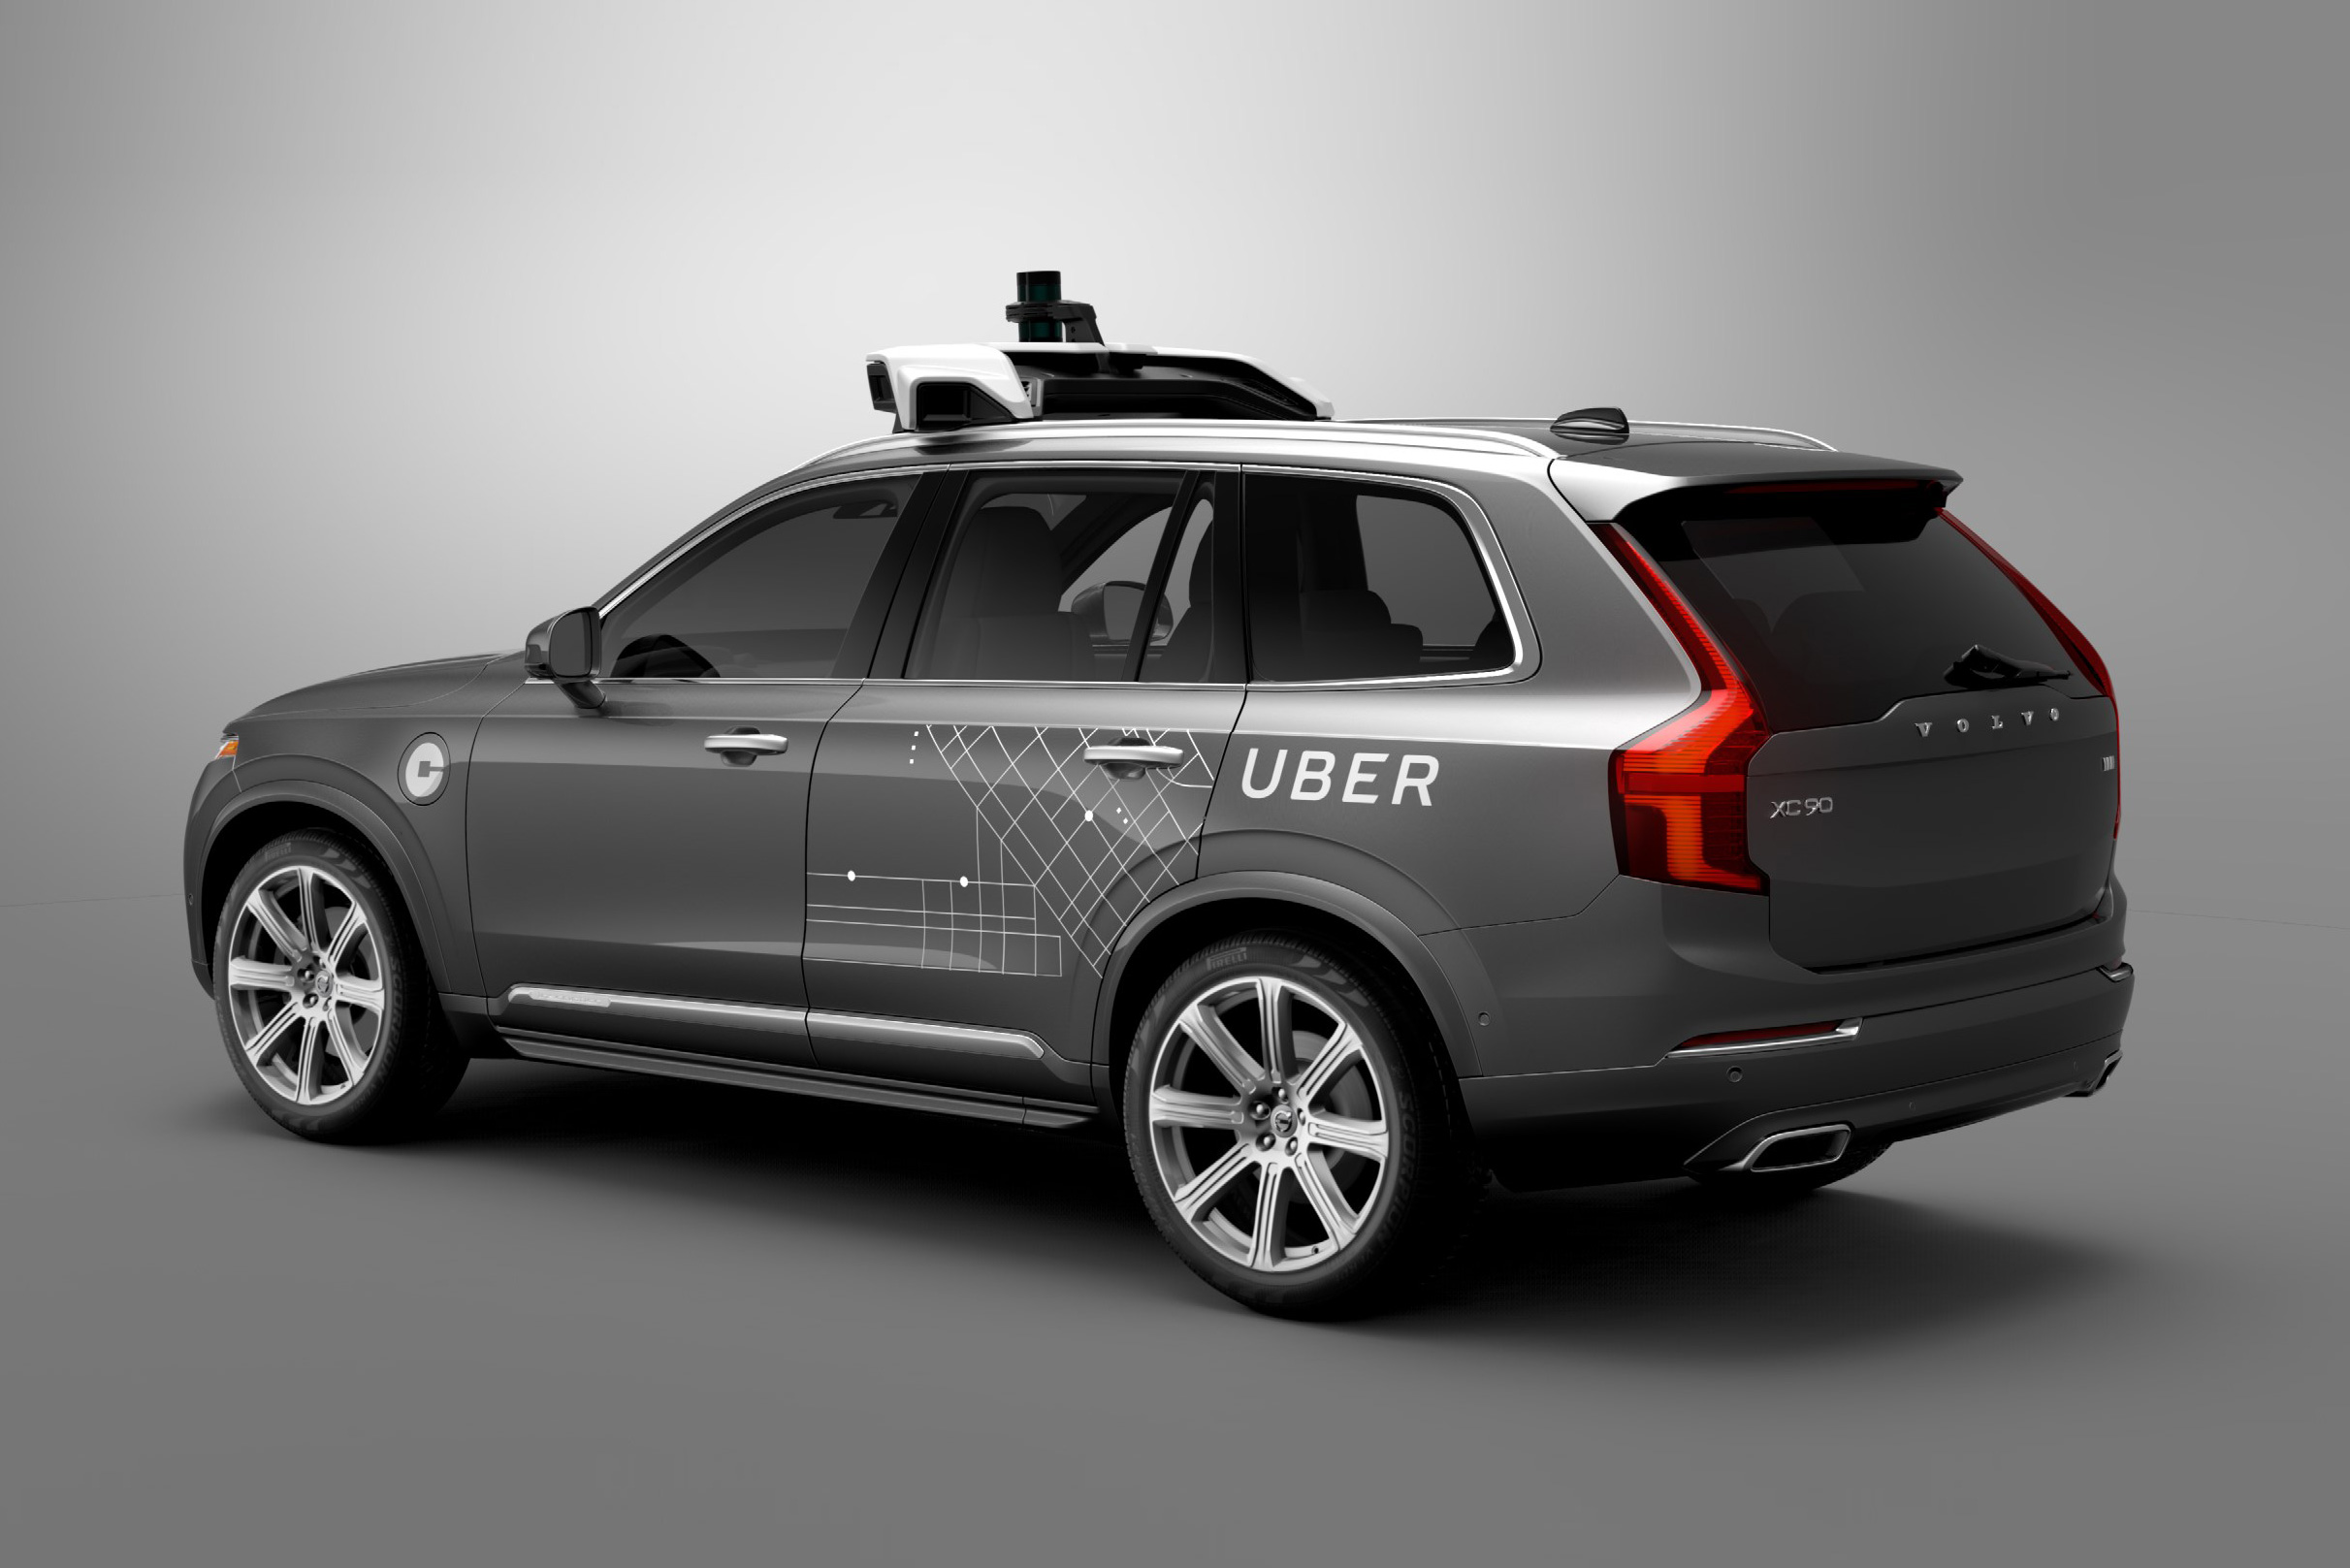 194852_Volvo_Cars_and_Uber_join_forces_to_develop_autonomous_driving_cars.jpg